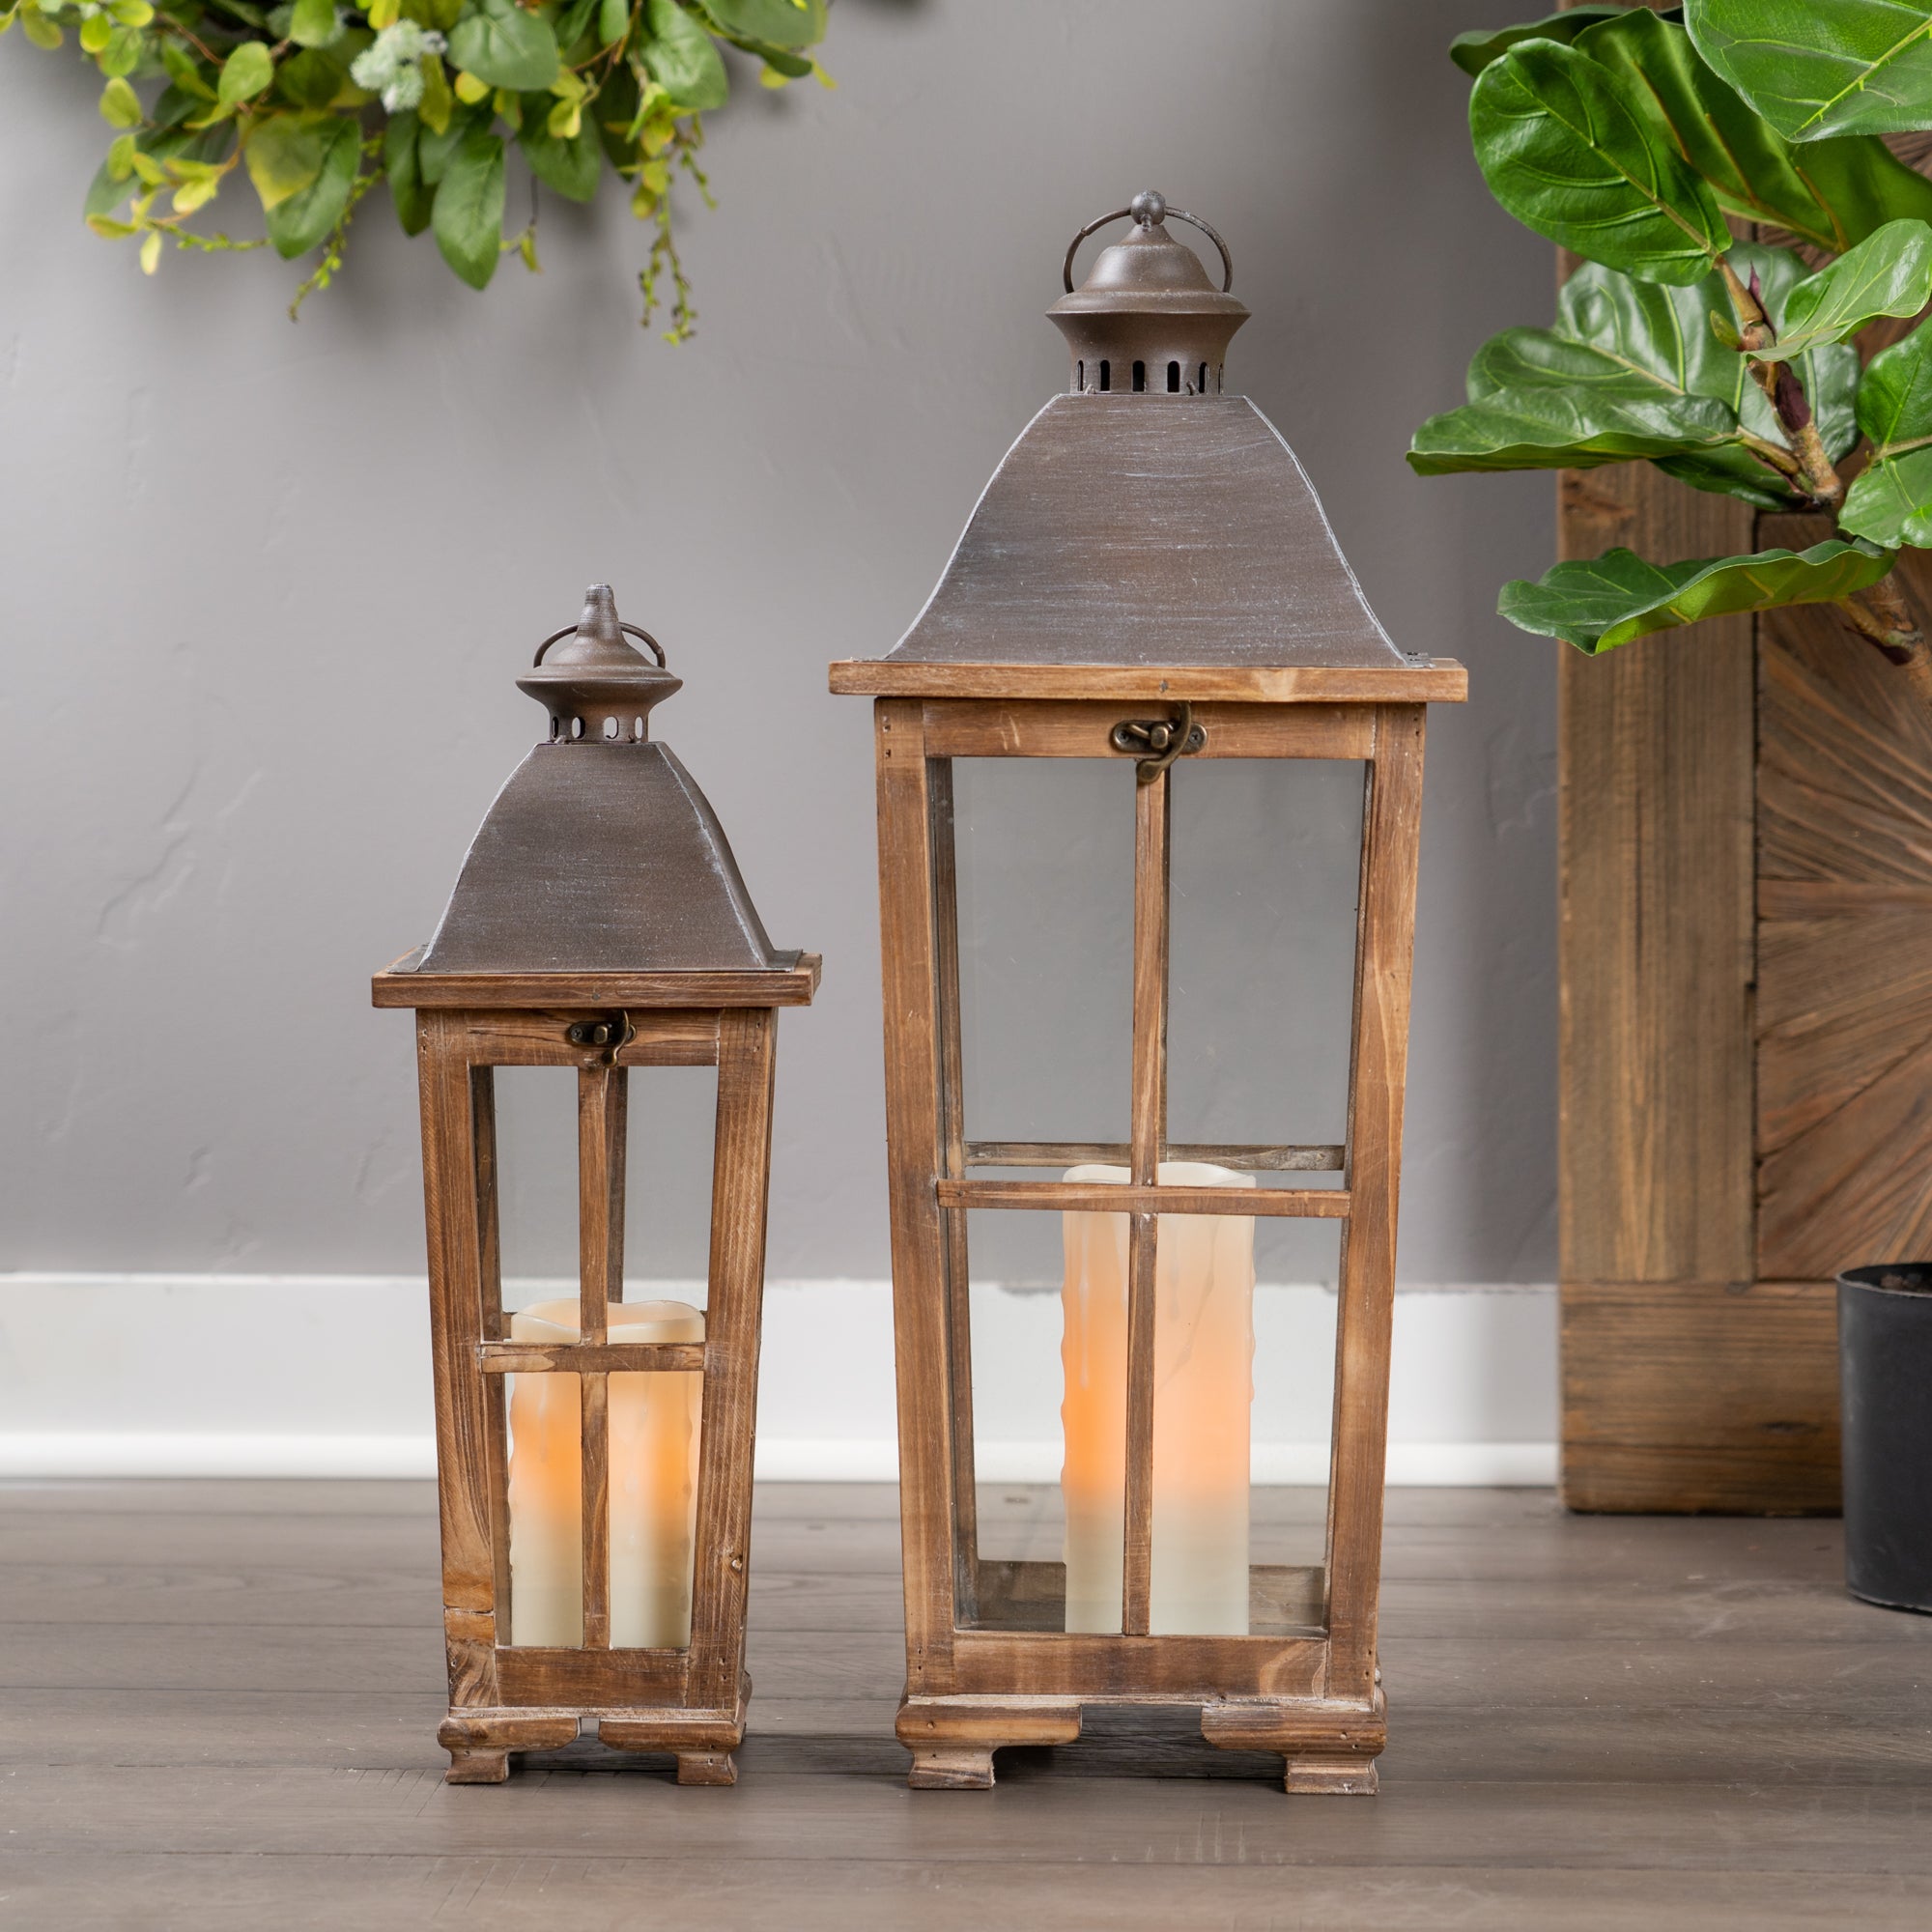 Set of Two Natural Solid Wood Ornate Tabletop Lantern Candle Holders